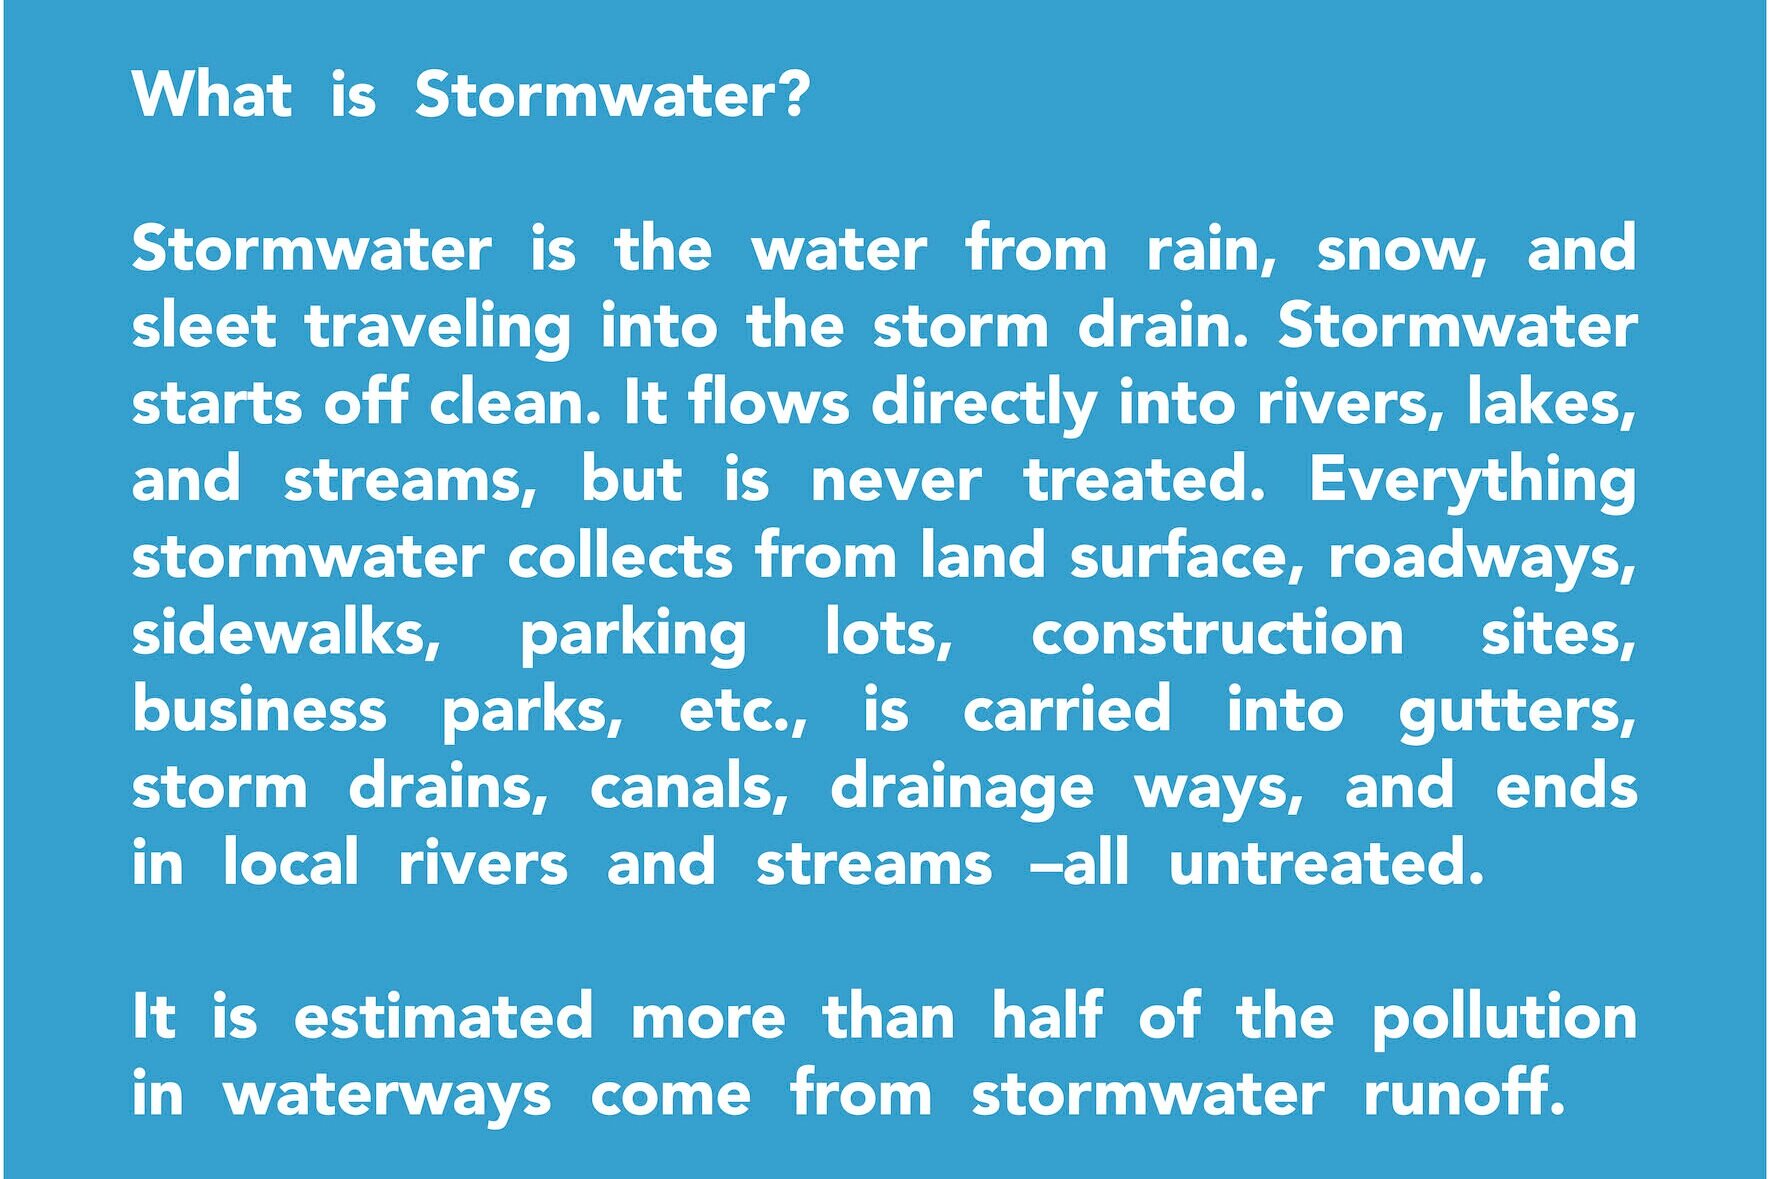 SL+Stormwater+Square+What+is+Stormwater.jpg